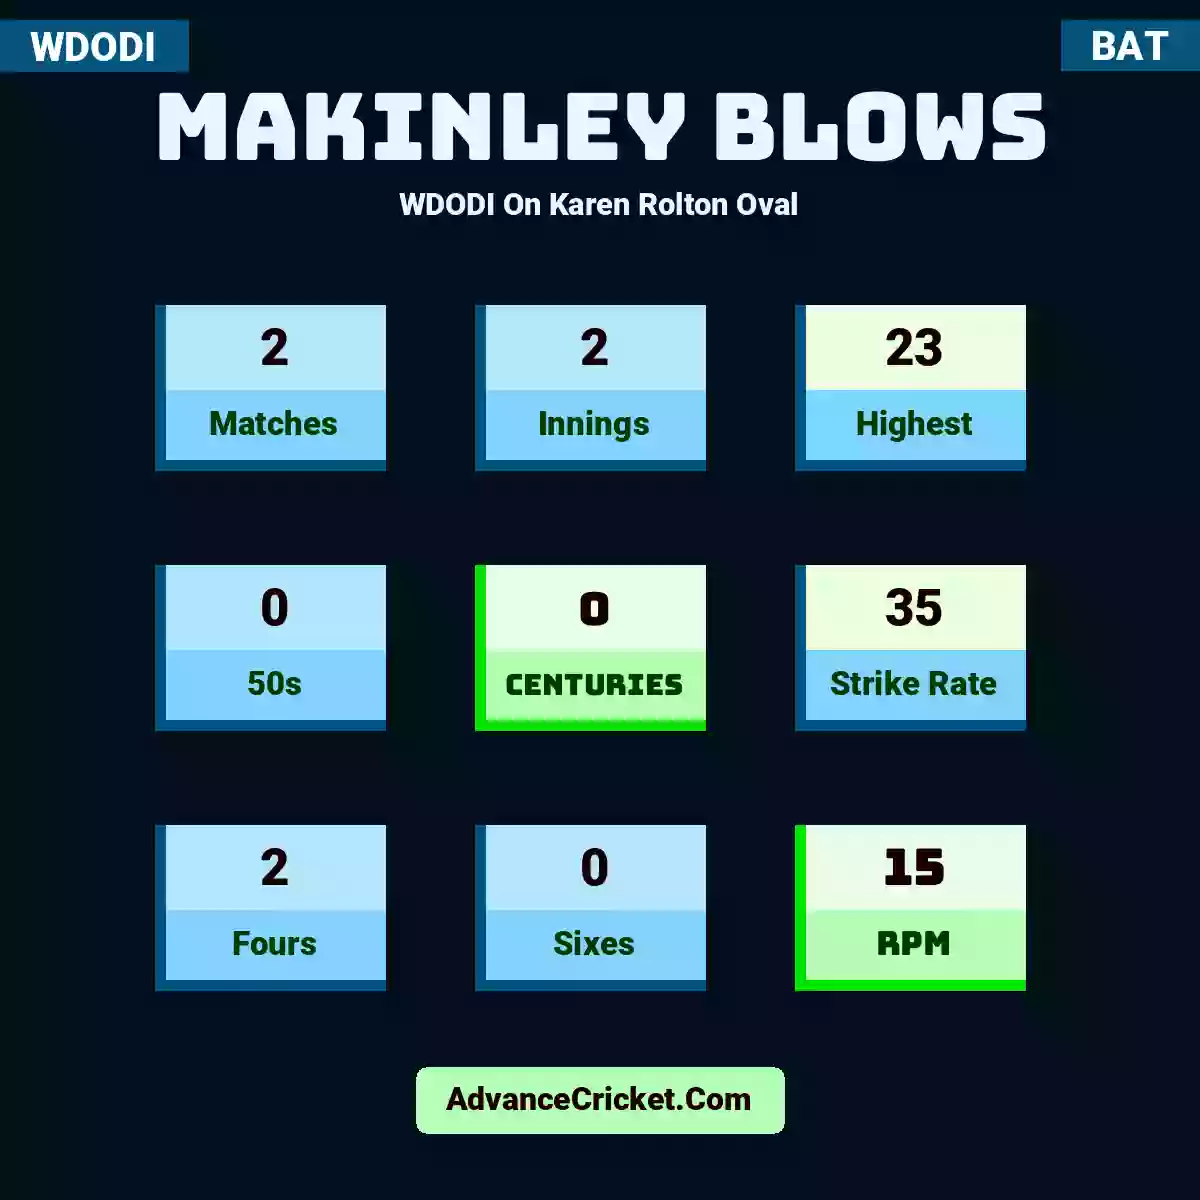 Makinley Blows WDODI  On Karen Rolton Oval, Makinley Blows played 2 matches, scored 23 runs as highest, 0 half-centuries, and 0 centuries, with a strike rate of 35. M.Blows hit 2 fours and 0 sixes, with an RPM of 15.